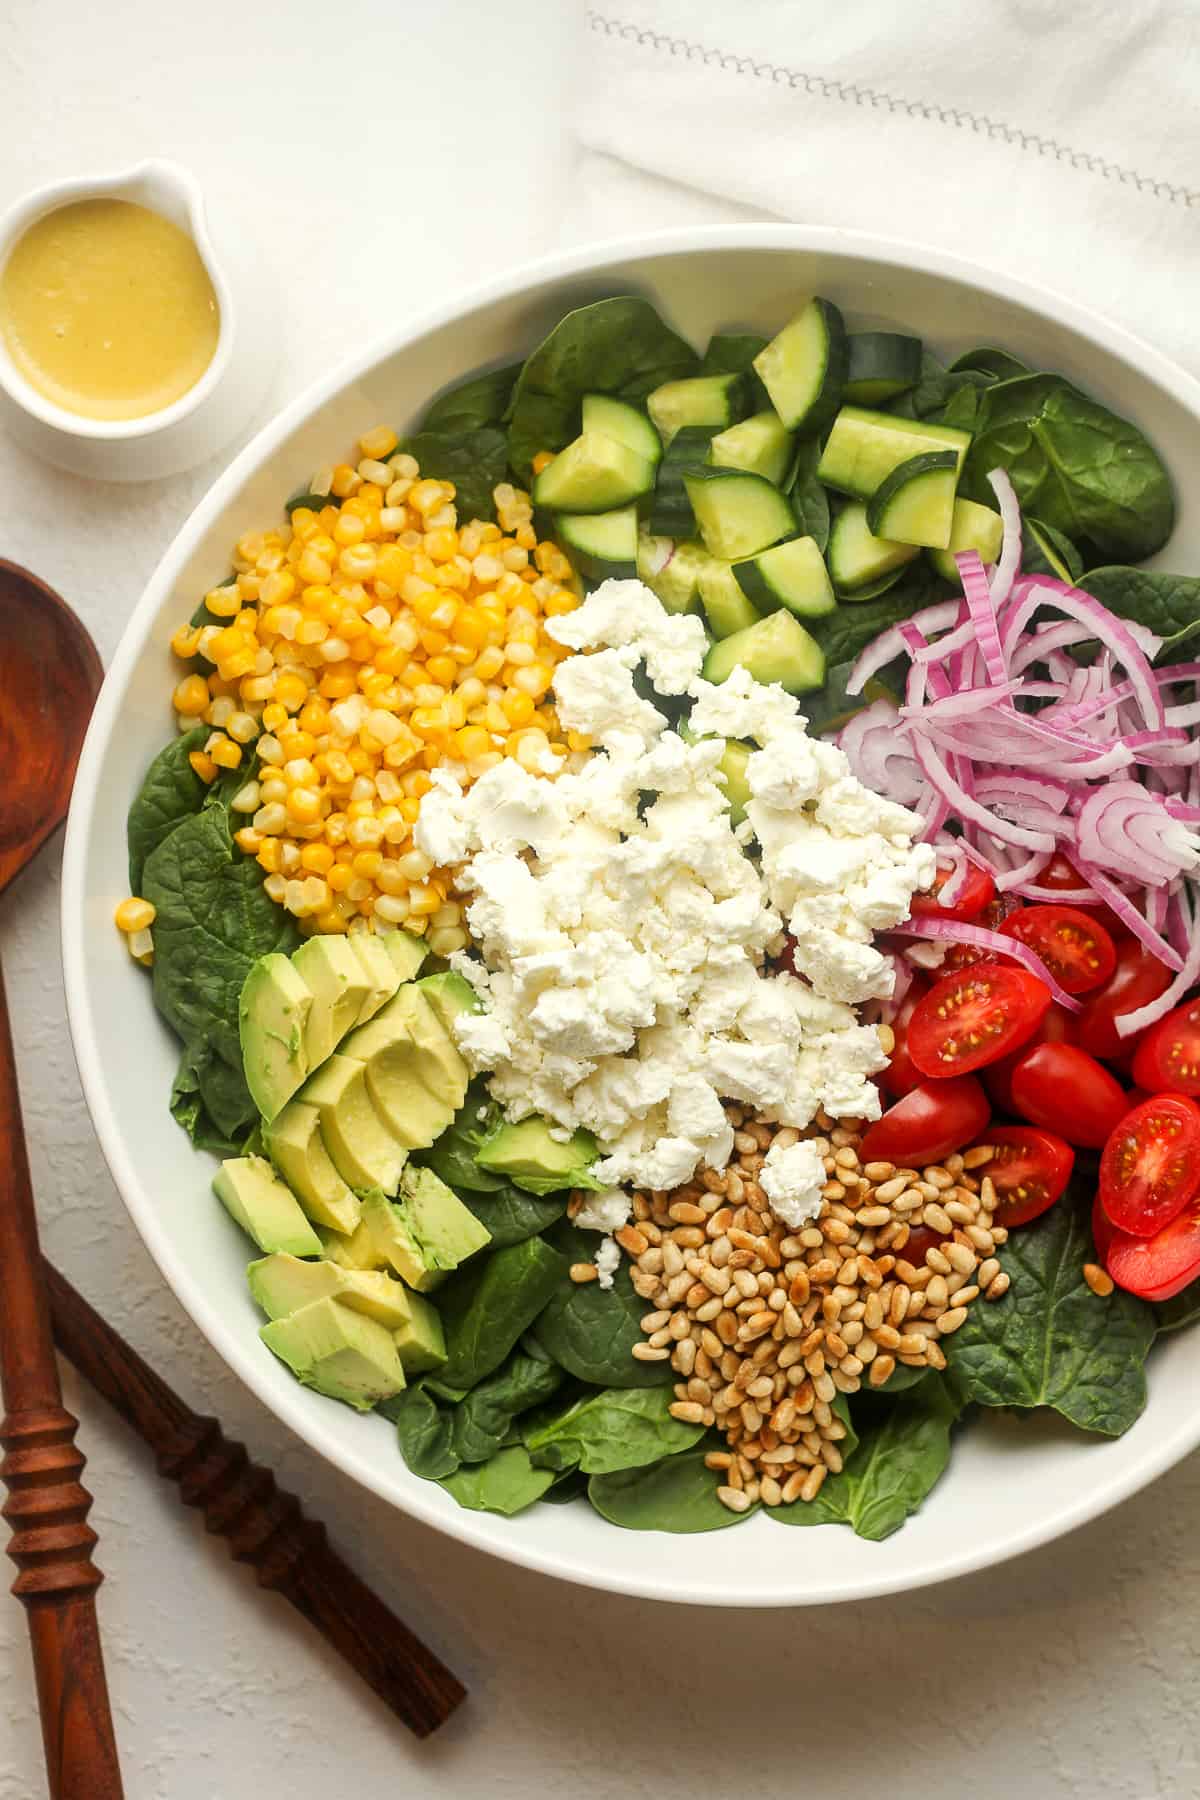 A bowl of the spinach salad with toppings separated by ingredients.